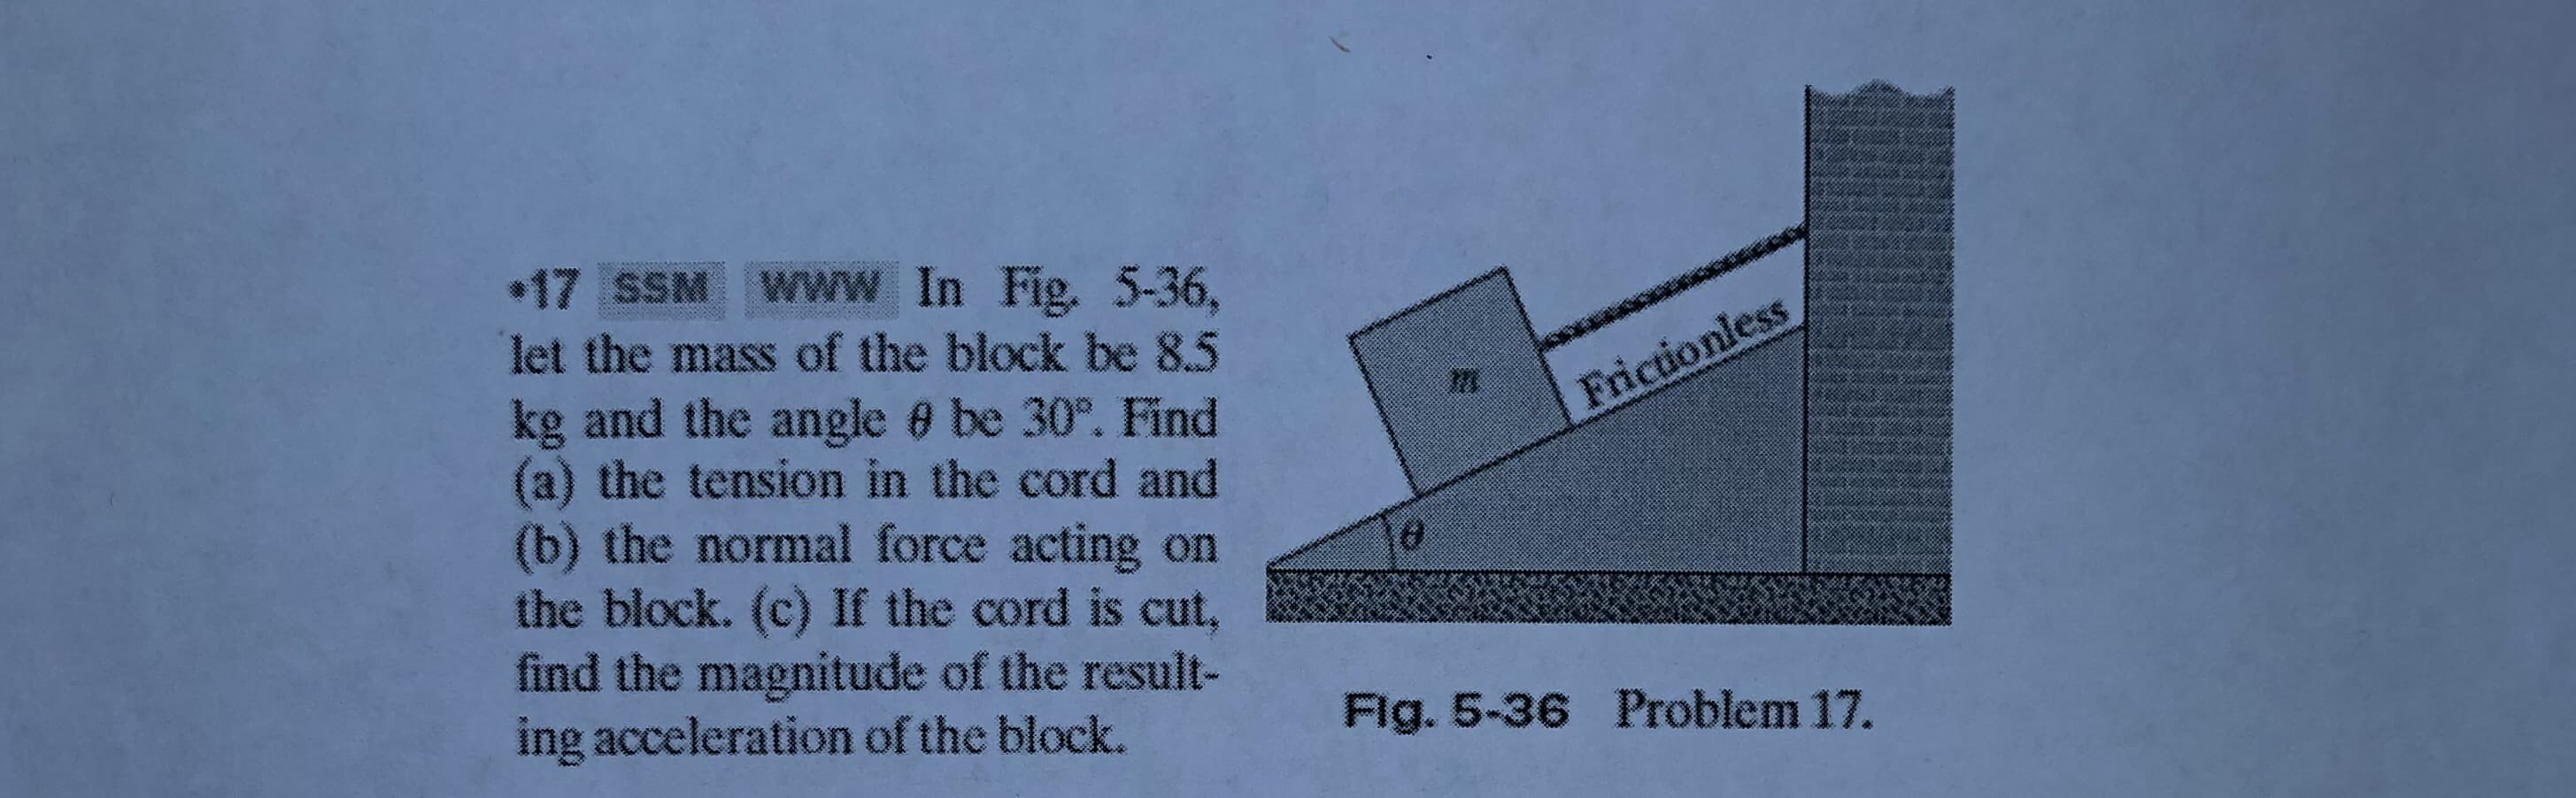 17 SSM Www In Fig. 5-36,
let the mass of the block be 8.5
kg and the angle 0 be 30°. Find
(a) the tension in the cord and
(b) the normal force acting on
the block. (c) If the cord is cut,
find the magnitude of the result-
ing acceleration of the block.
Frictionless
Fig. 5-36 Problem 17.
